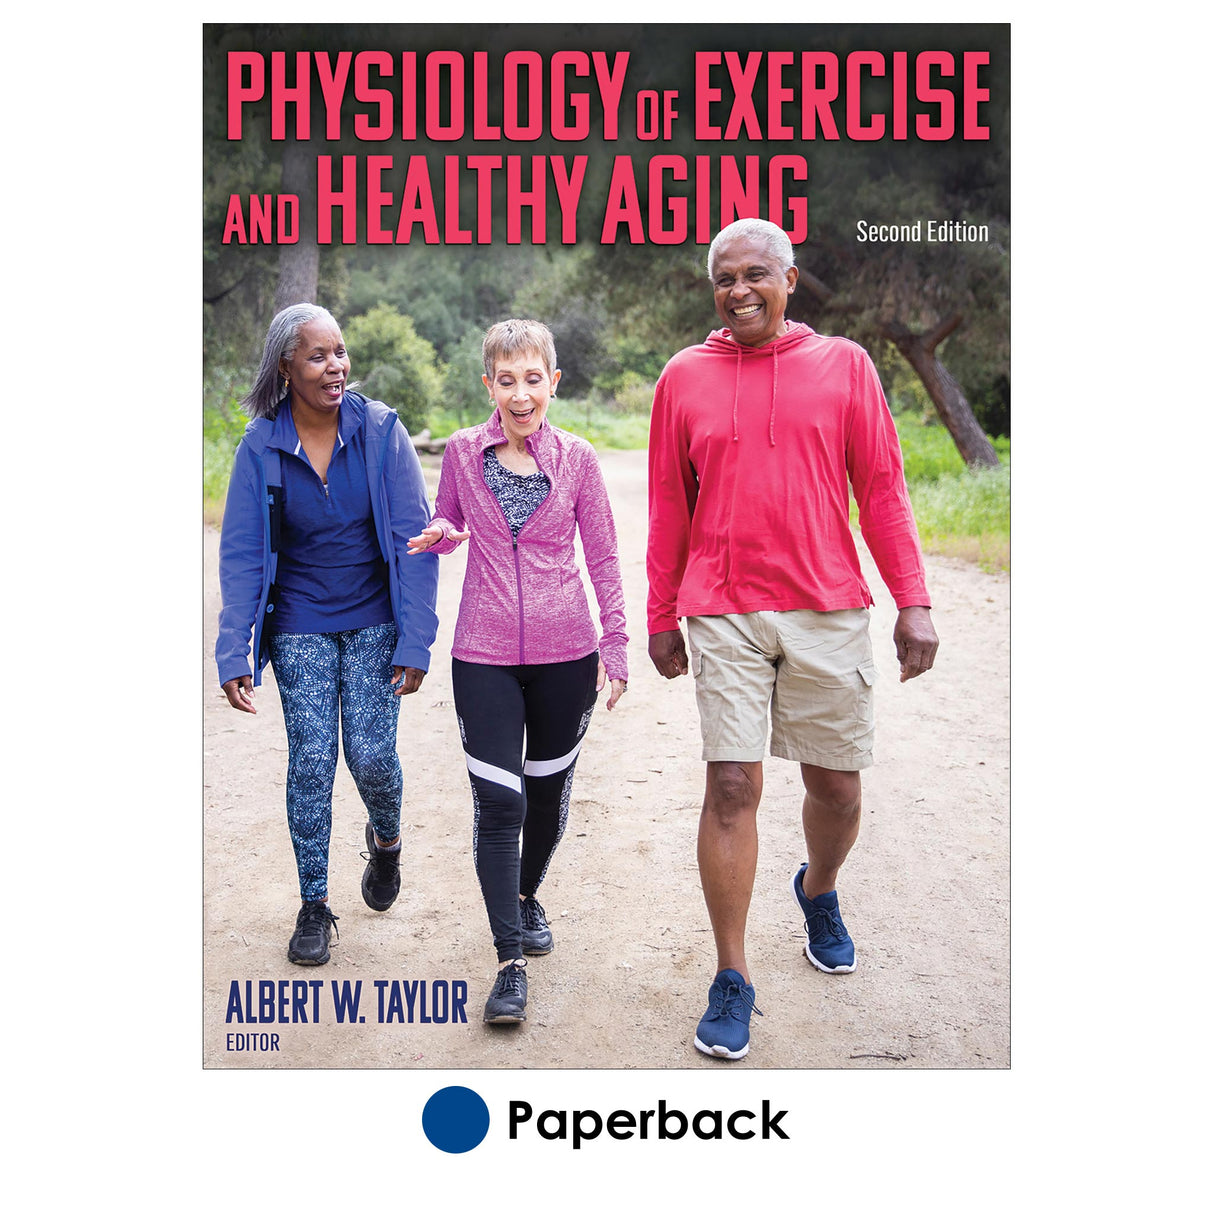 Physiology of Exercise and Healthy Aging-2nd Edition